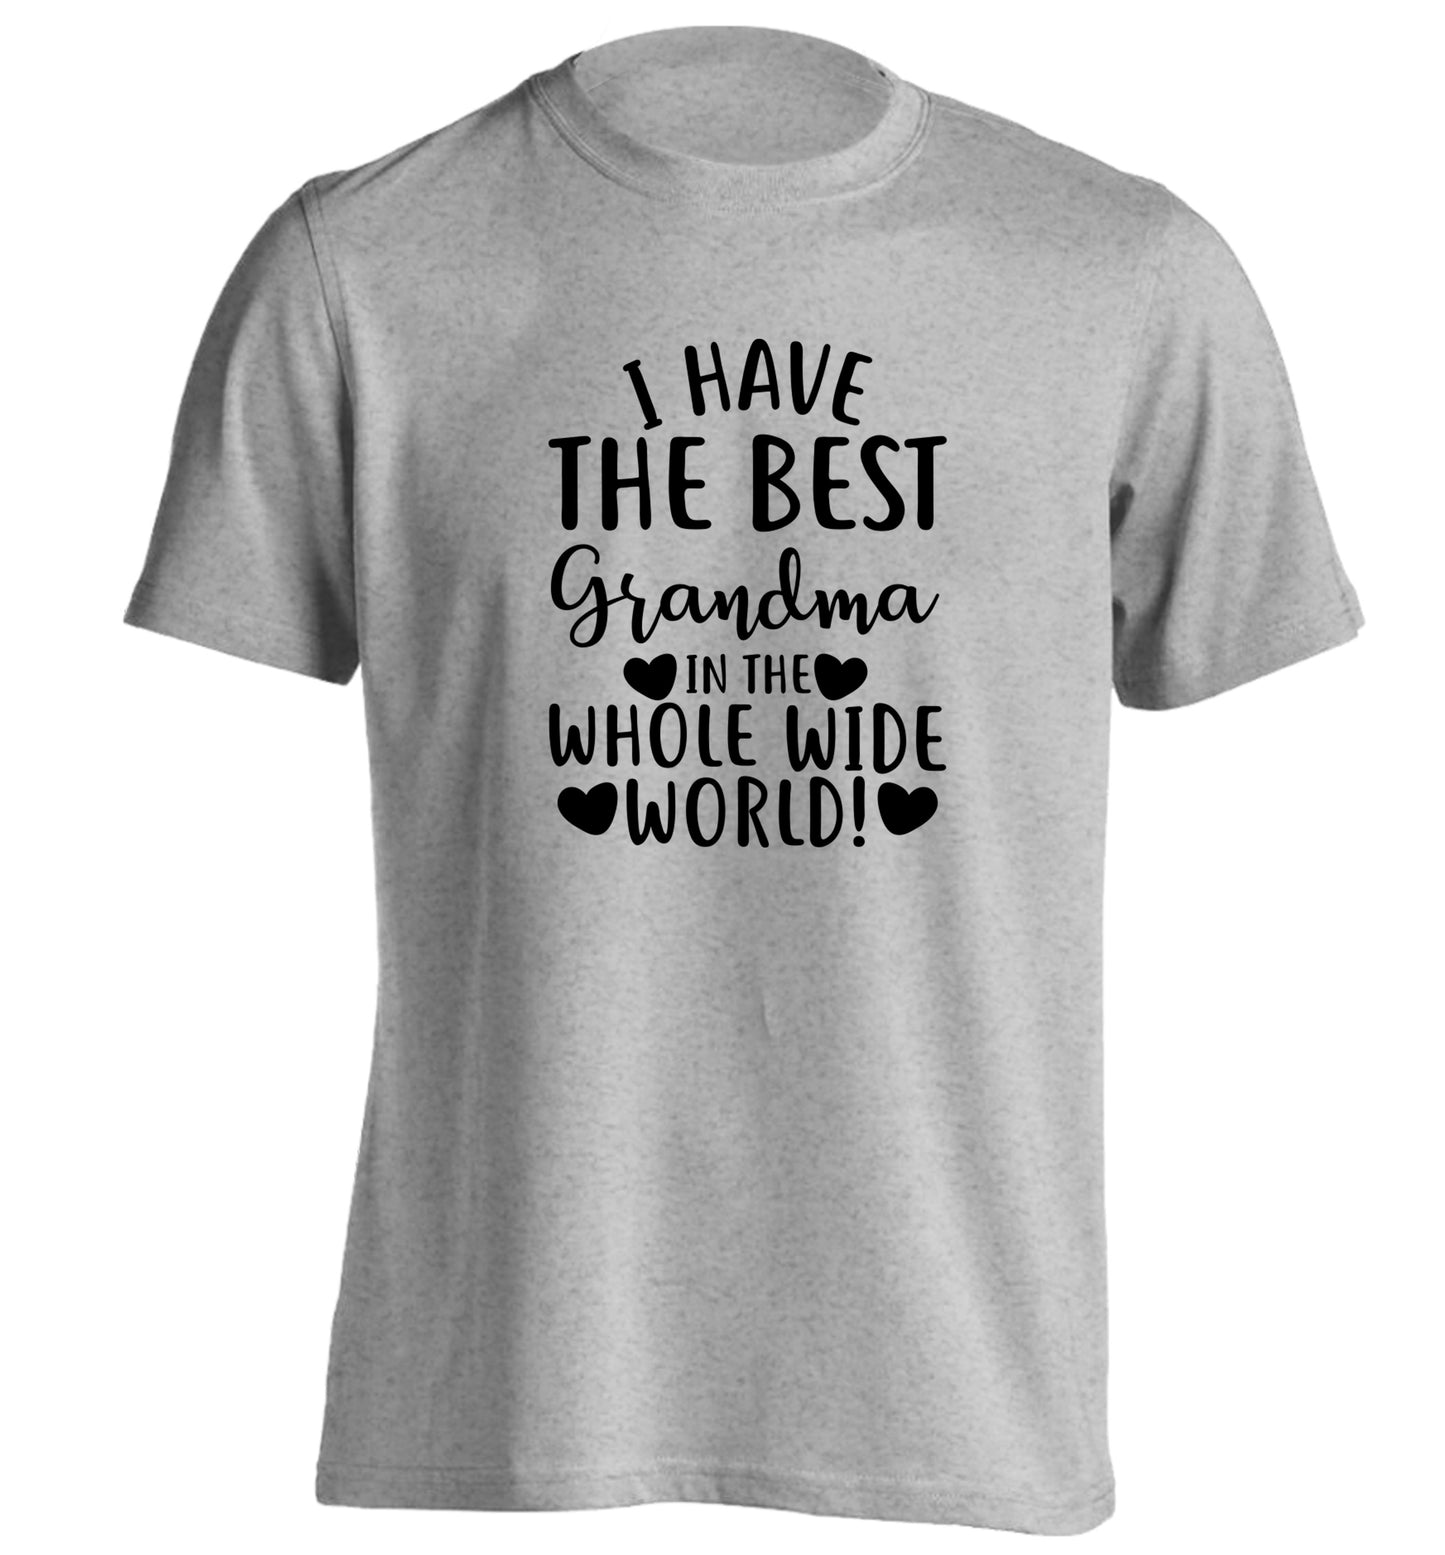 I have the best grandma in the whole wide world! adults unisex grey Tshirt 2XL